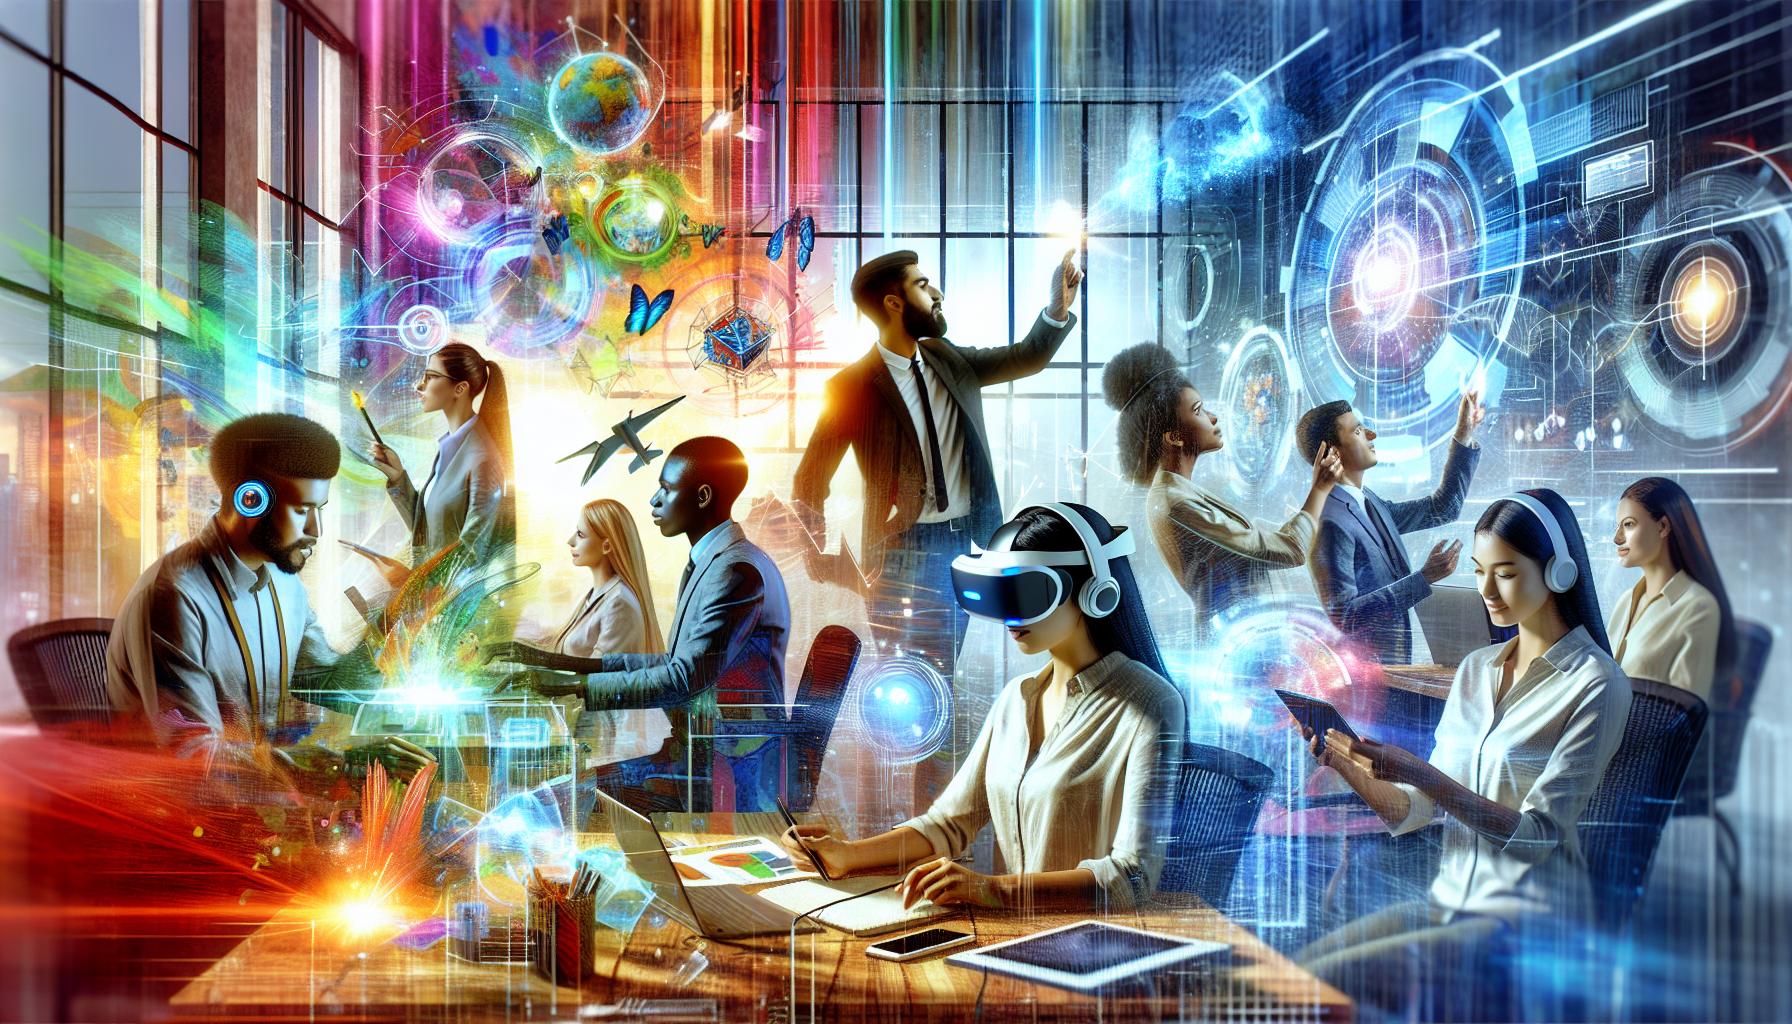 An artistic representation of a bustling digital marketing office, with diverse professional characters interacting with modern tech devices and virtual dashboards displaying various customer outreach